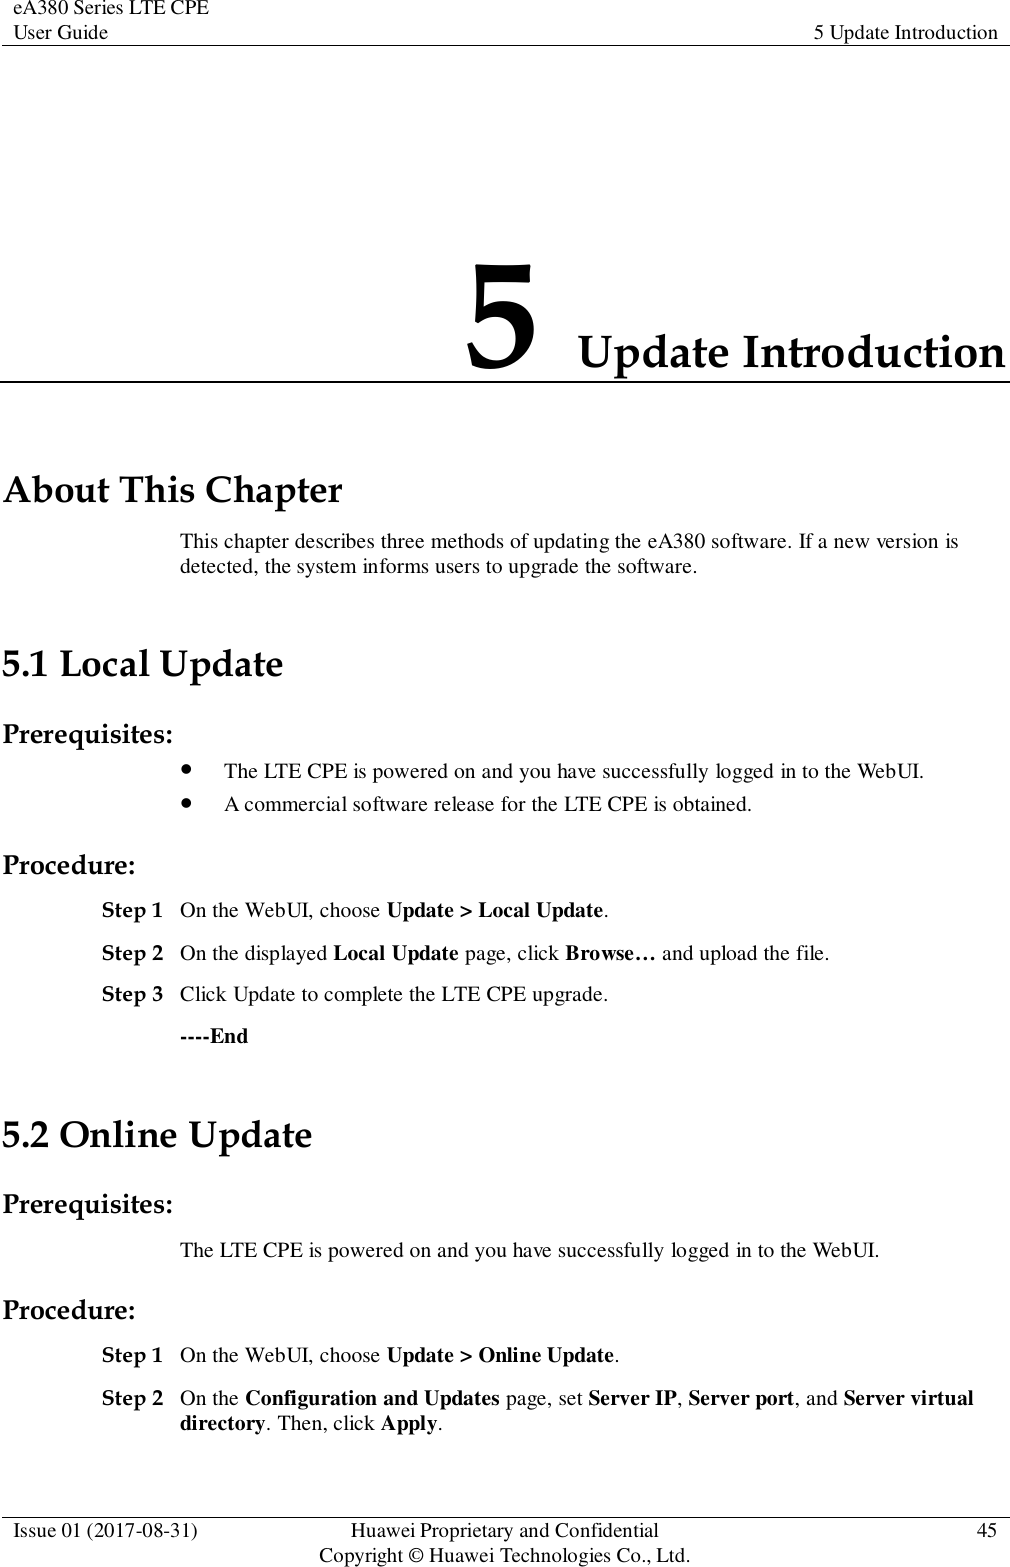 eA380 Series LTE CPE User Guide 5 Update Introduction  Issue 01 (2017-08-31) Huawei Proprietary and Confidential                                     Copyright © Huawei Technologies Co., Ltd. 45  5 Update Introduction About This Chapter This chapter describes three methods of updating the eA380 software. If a new version is detected, the system informs users to upgrade the software.   5.1 Local Update Prerequisites:  The LTE CPE is powered on and you have successfully logged in to the WebUI.    A commercial software release for the LTE CPE is obtained. Procedure: Step 1 On the WebUI, choose Update &gt; Local Update.   Step 2 On the displayed Local Update page, click Browse… and upload the file.   Step 3 Click Update to complete the LTE CPE upgrade. ----End 5.2 Online Update Prerequisites: The LTE CPE is powered on and you have successfully logged in to the WebUI.   Procedure: Step 1 On the WebUI, choose Update &gt; Online Update.   Step 2 On the Configuration and Updates page, set Server IP, Server port, and Server virtual directory. Then, click Apply. 